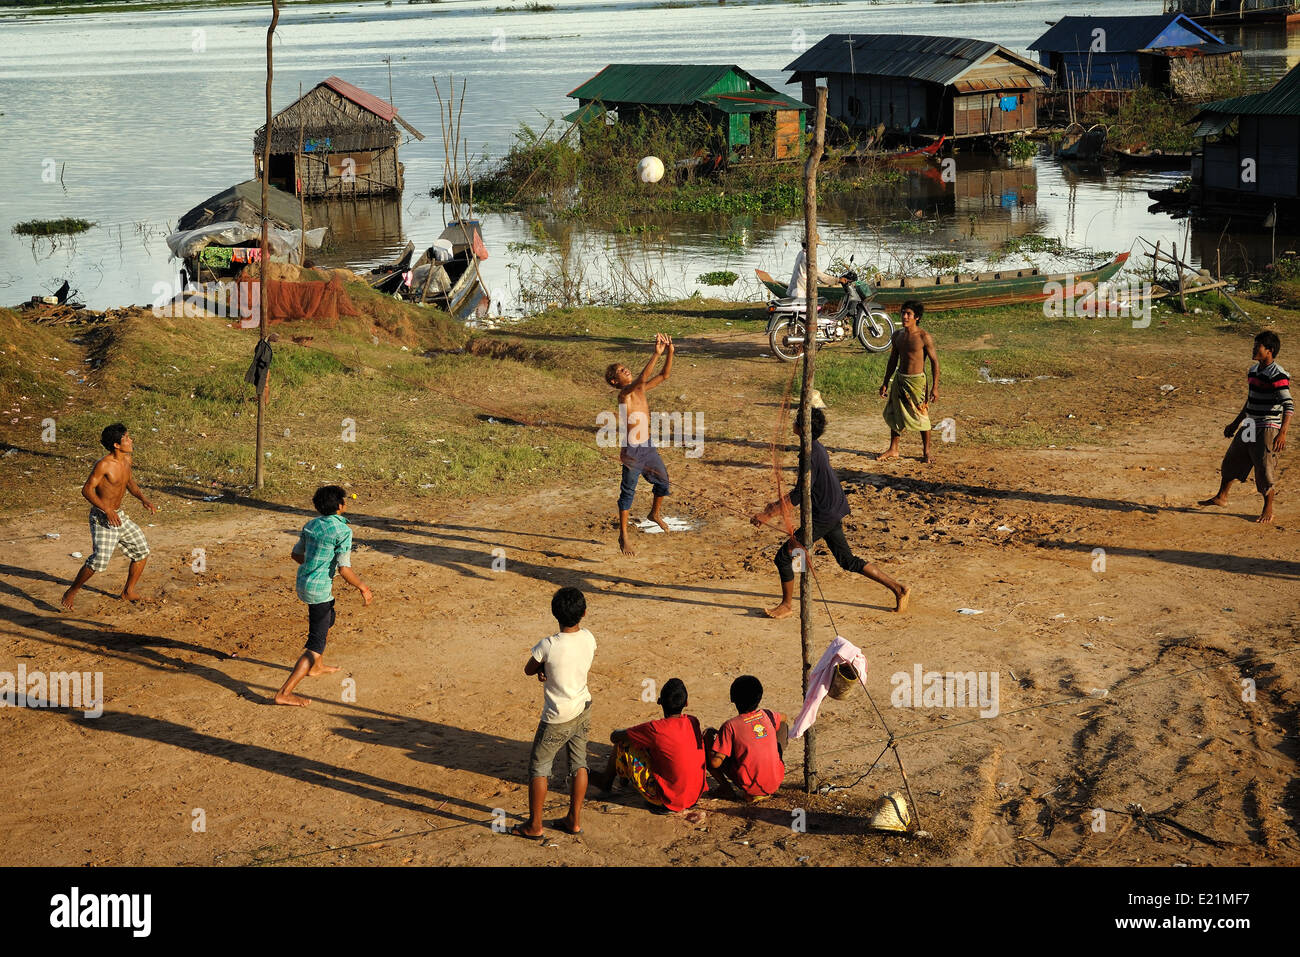 Boys are playing volleyball on a piece of dry land in the floating village of Chong Kneas, Tonle Sap Lake, Cambodia Stock Photo